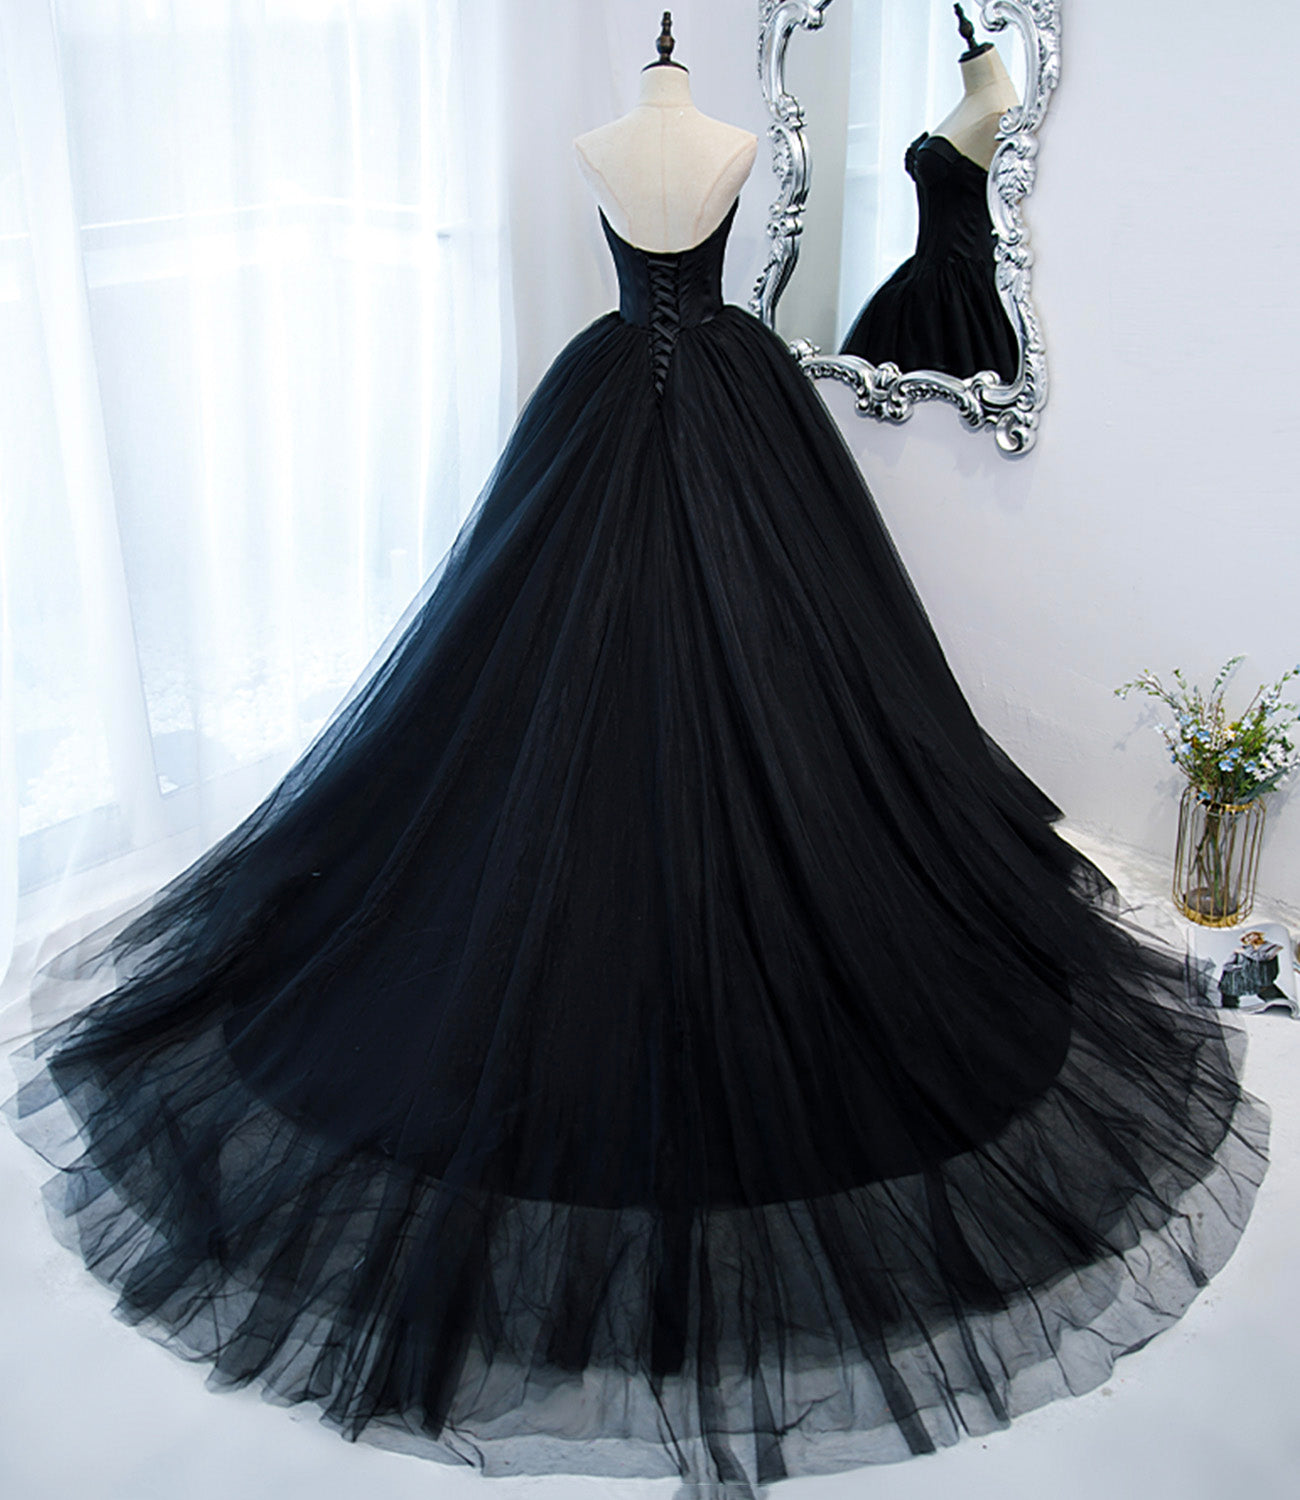 Black tulle long ball gown dress black evening gown  10152